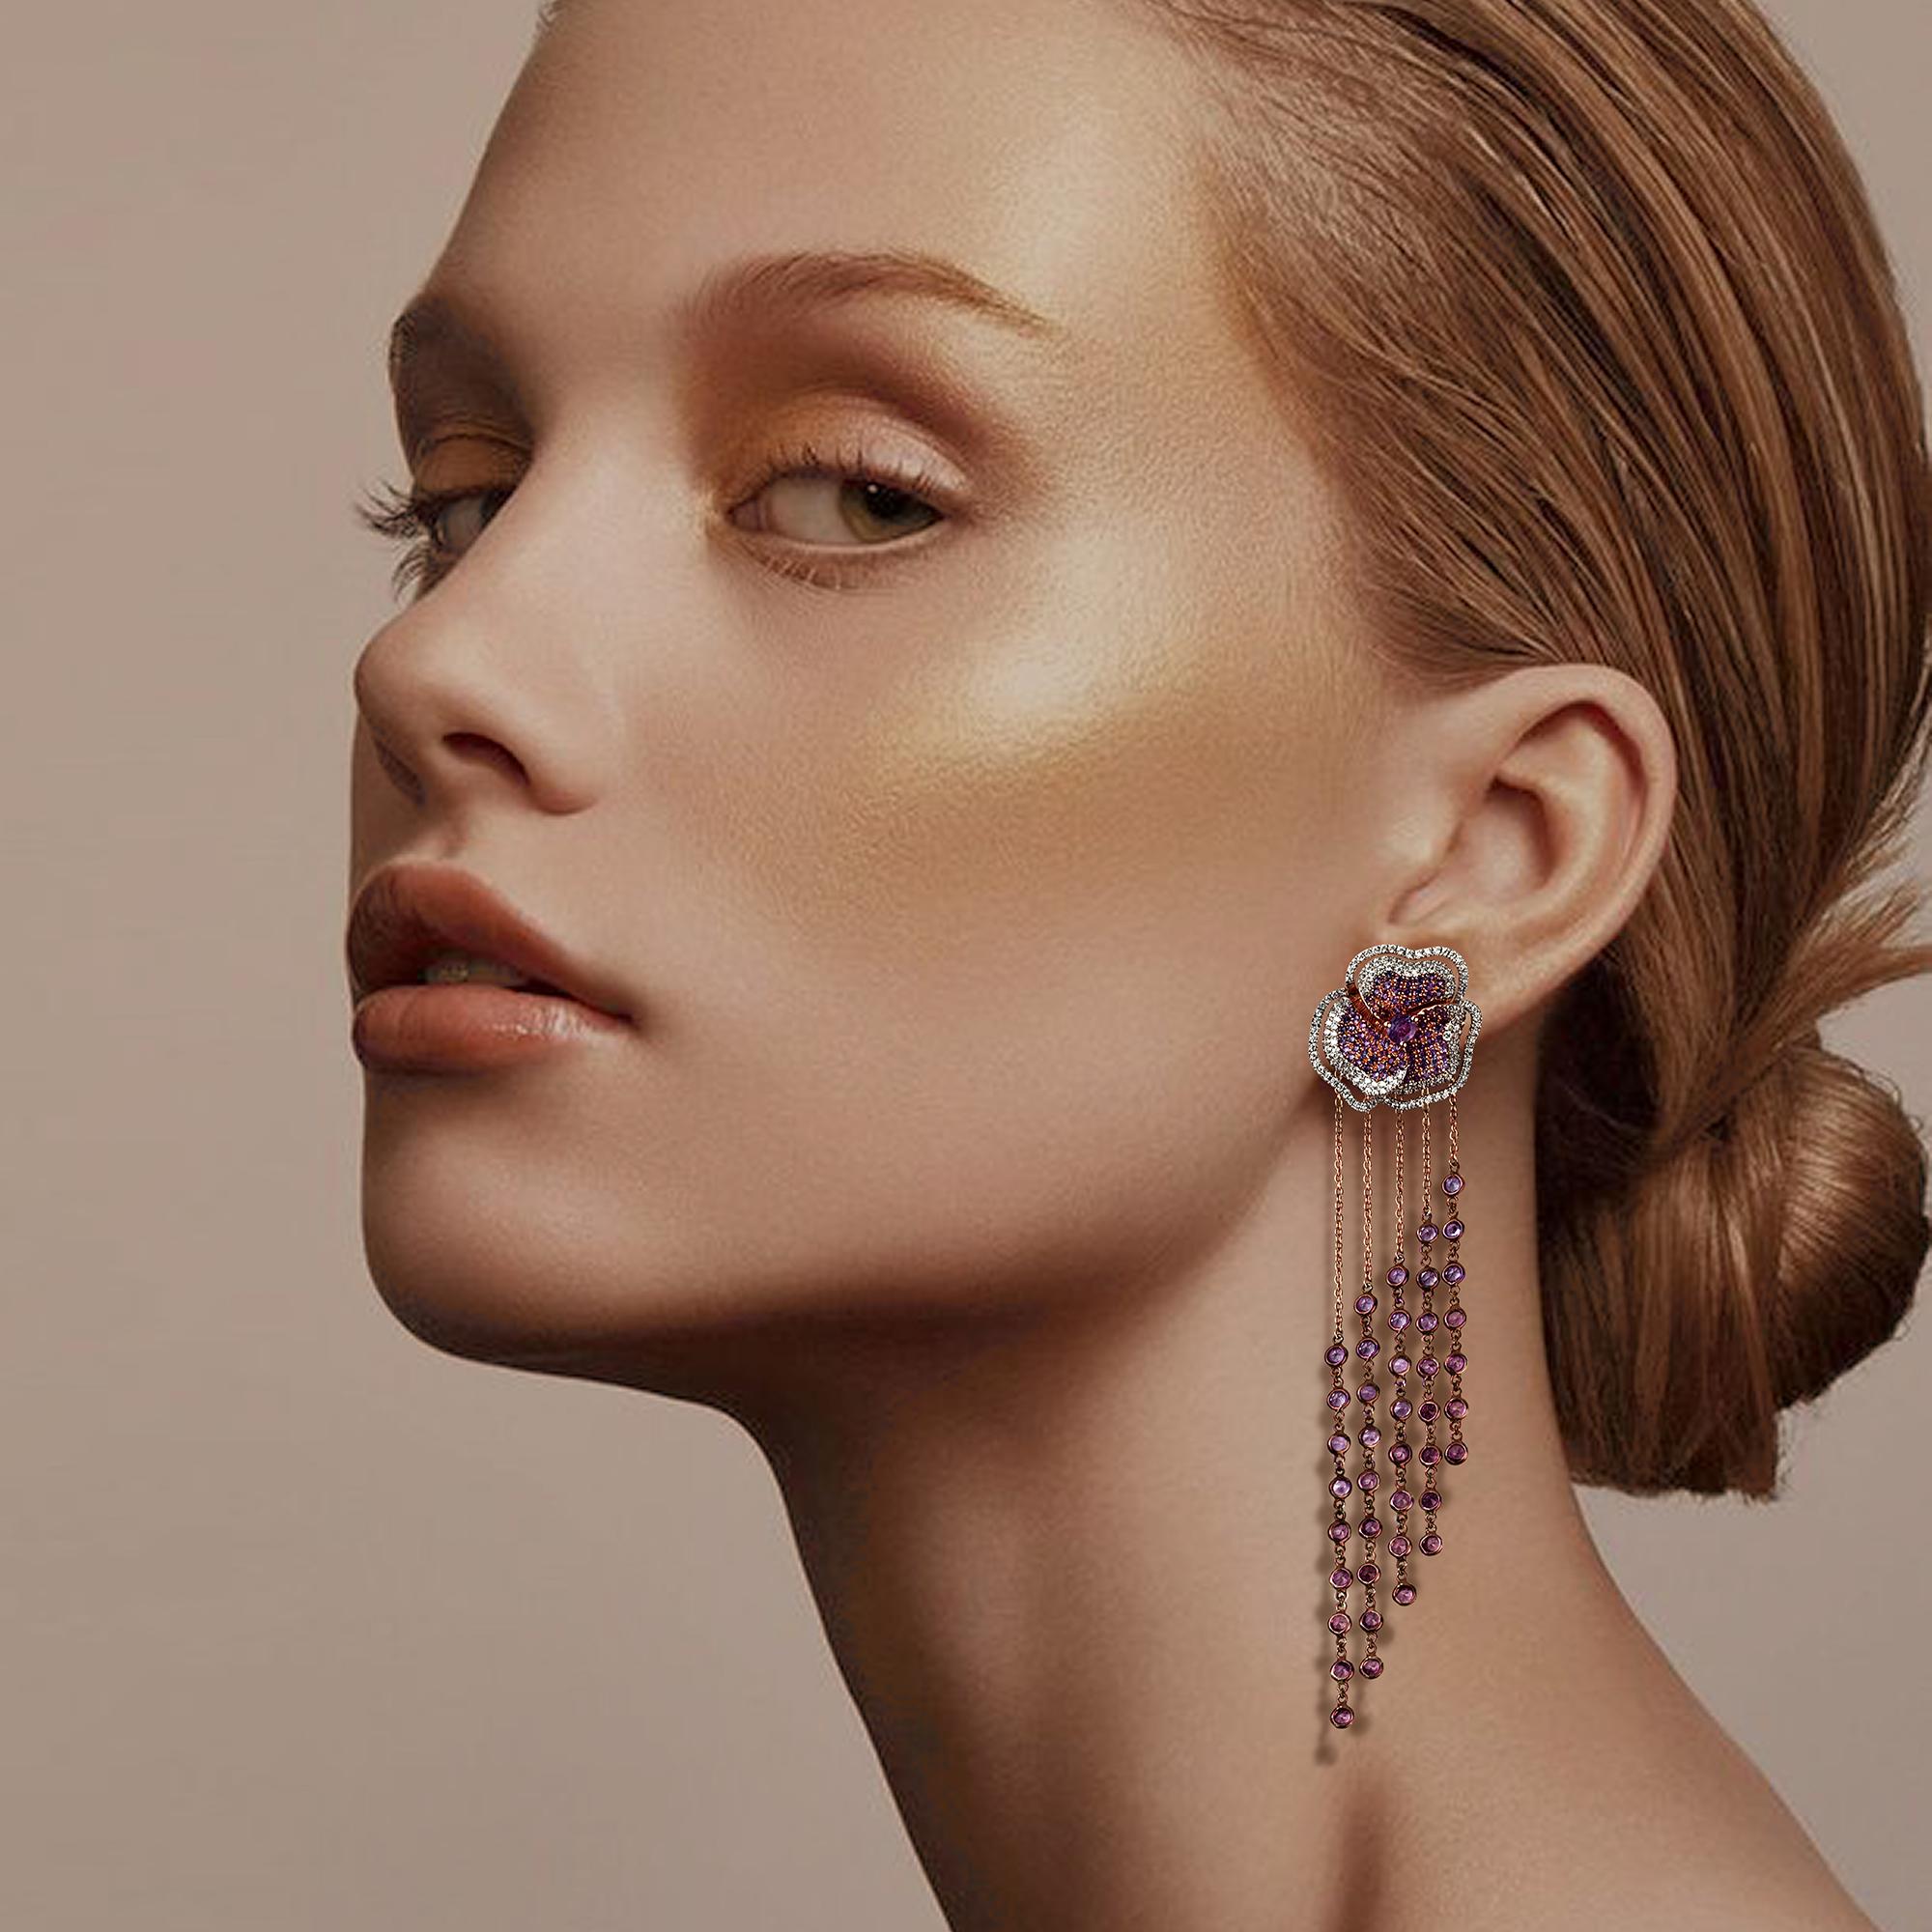 Bloom Halo Medium Flower Amethyst Long Earrings in 18K Rose Gold

Treat yourself to a bit of luxury with Bloom Statement earrings. They are made with 18K rose gold and feature Amethyst. Add a touch of elegance to any outfit with these stunning